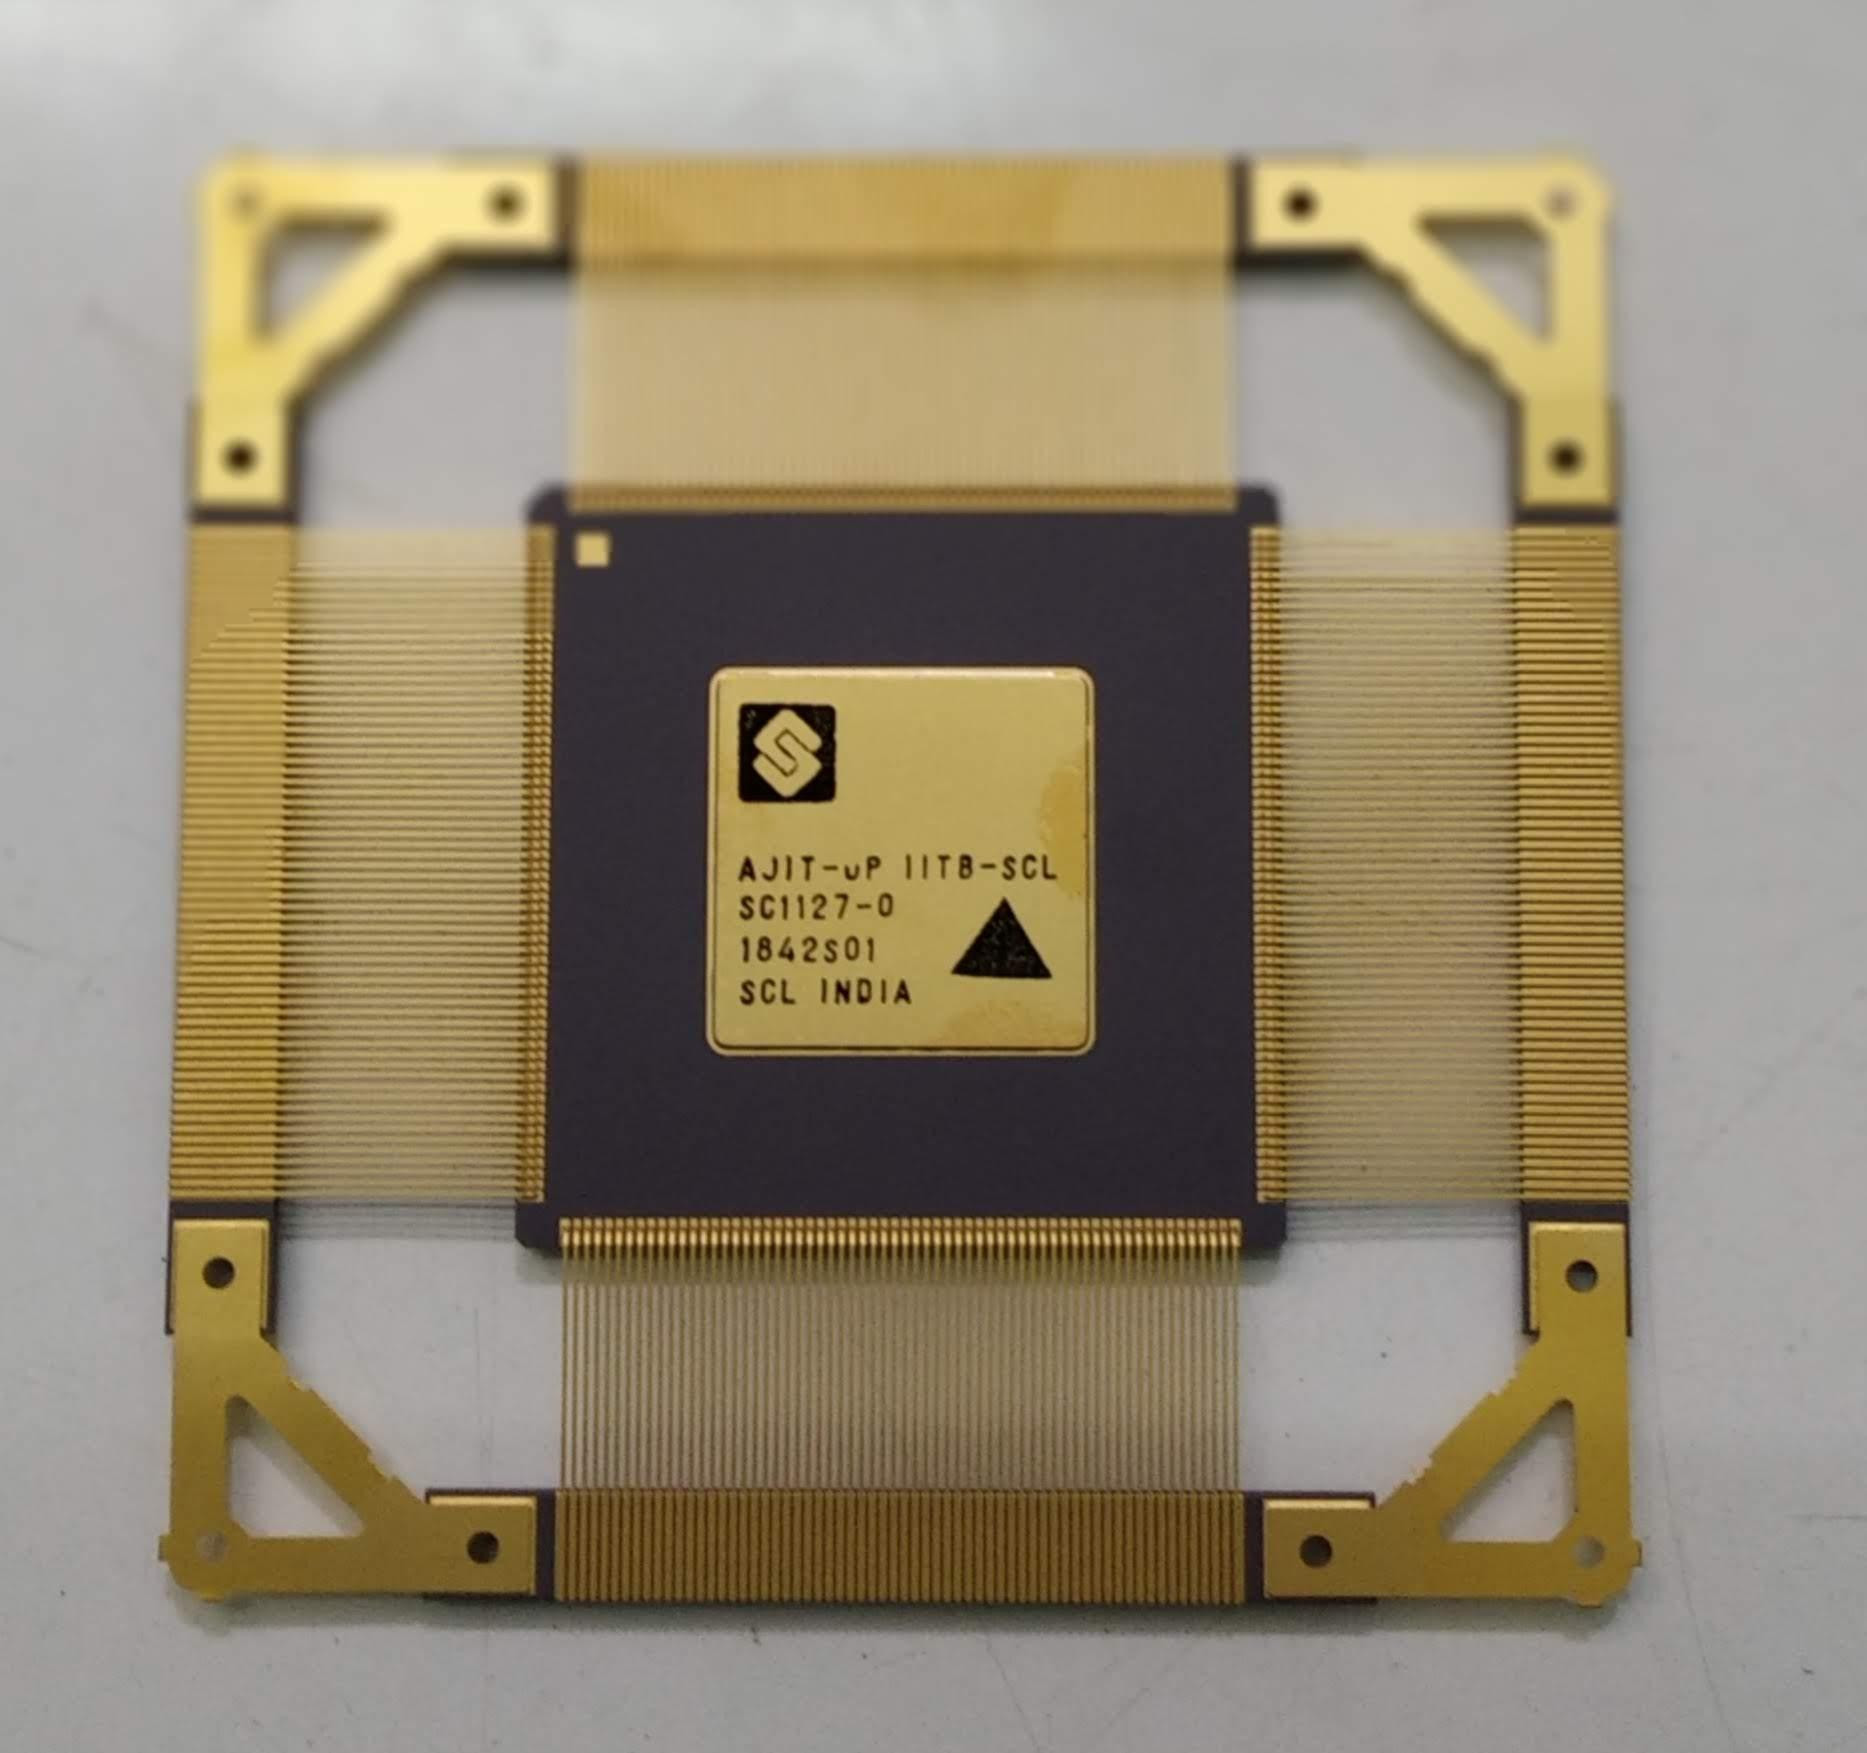 AJIT – First-Ever “Made in India” Microprocessor Designed By IIT Bombay